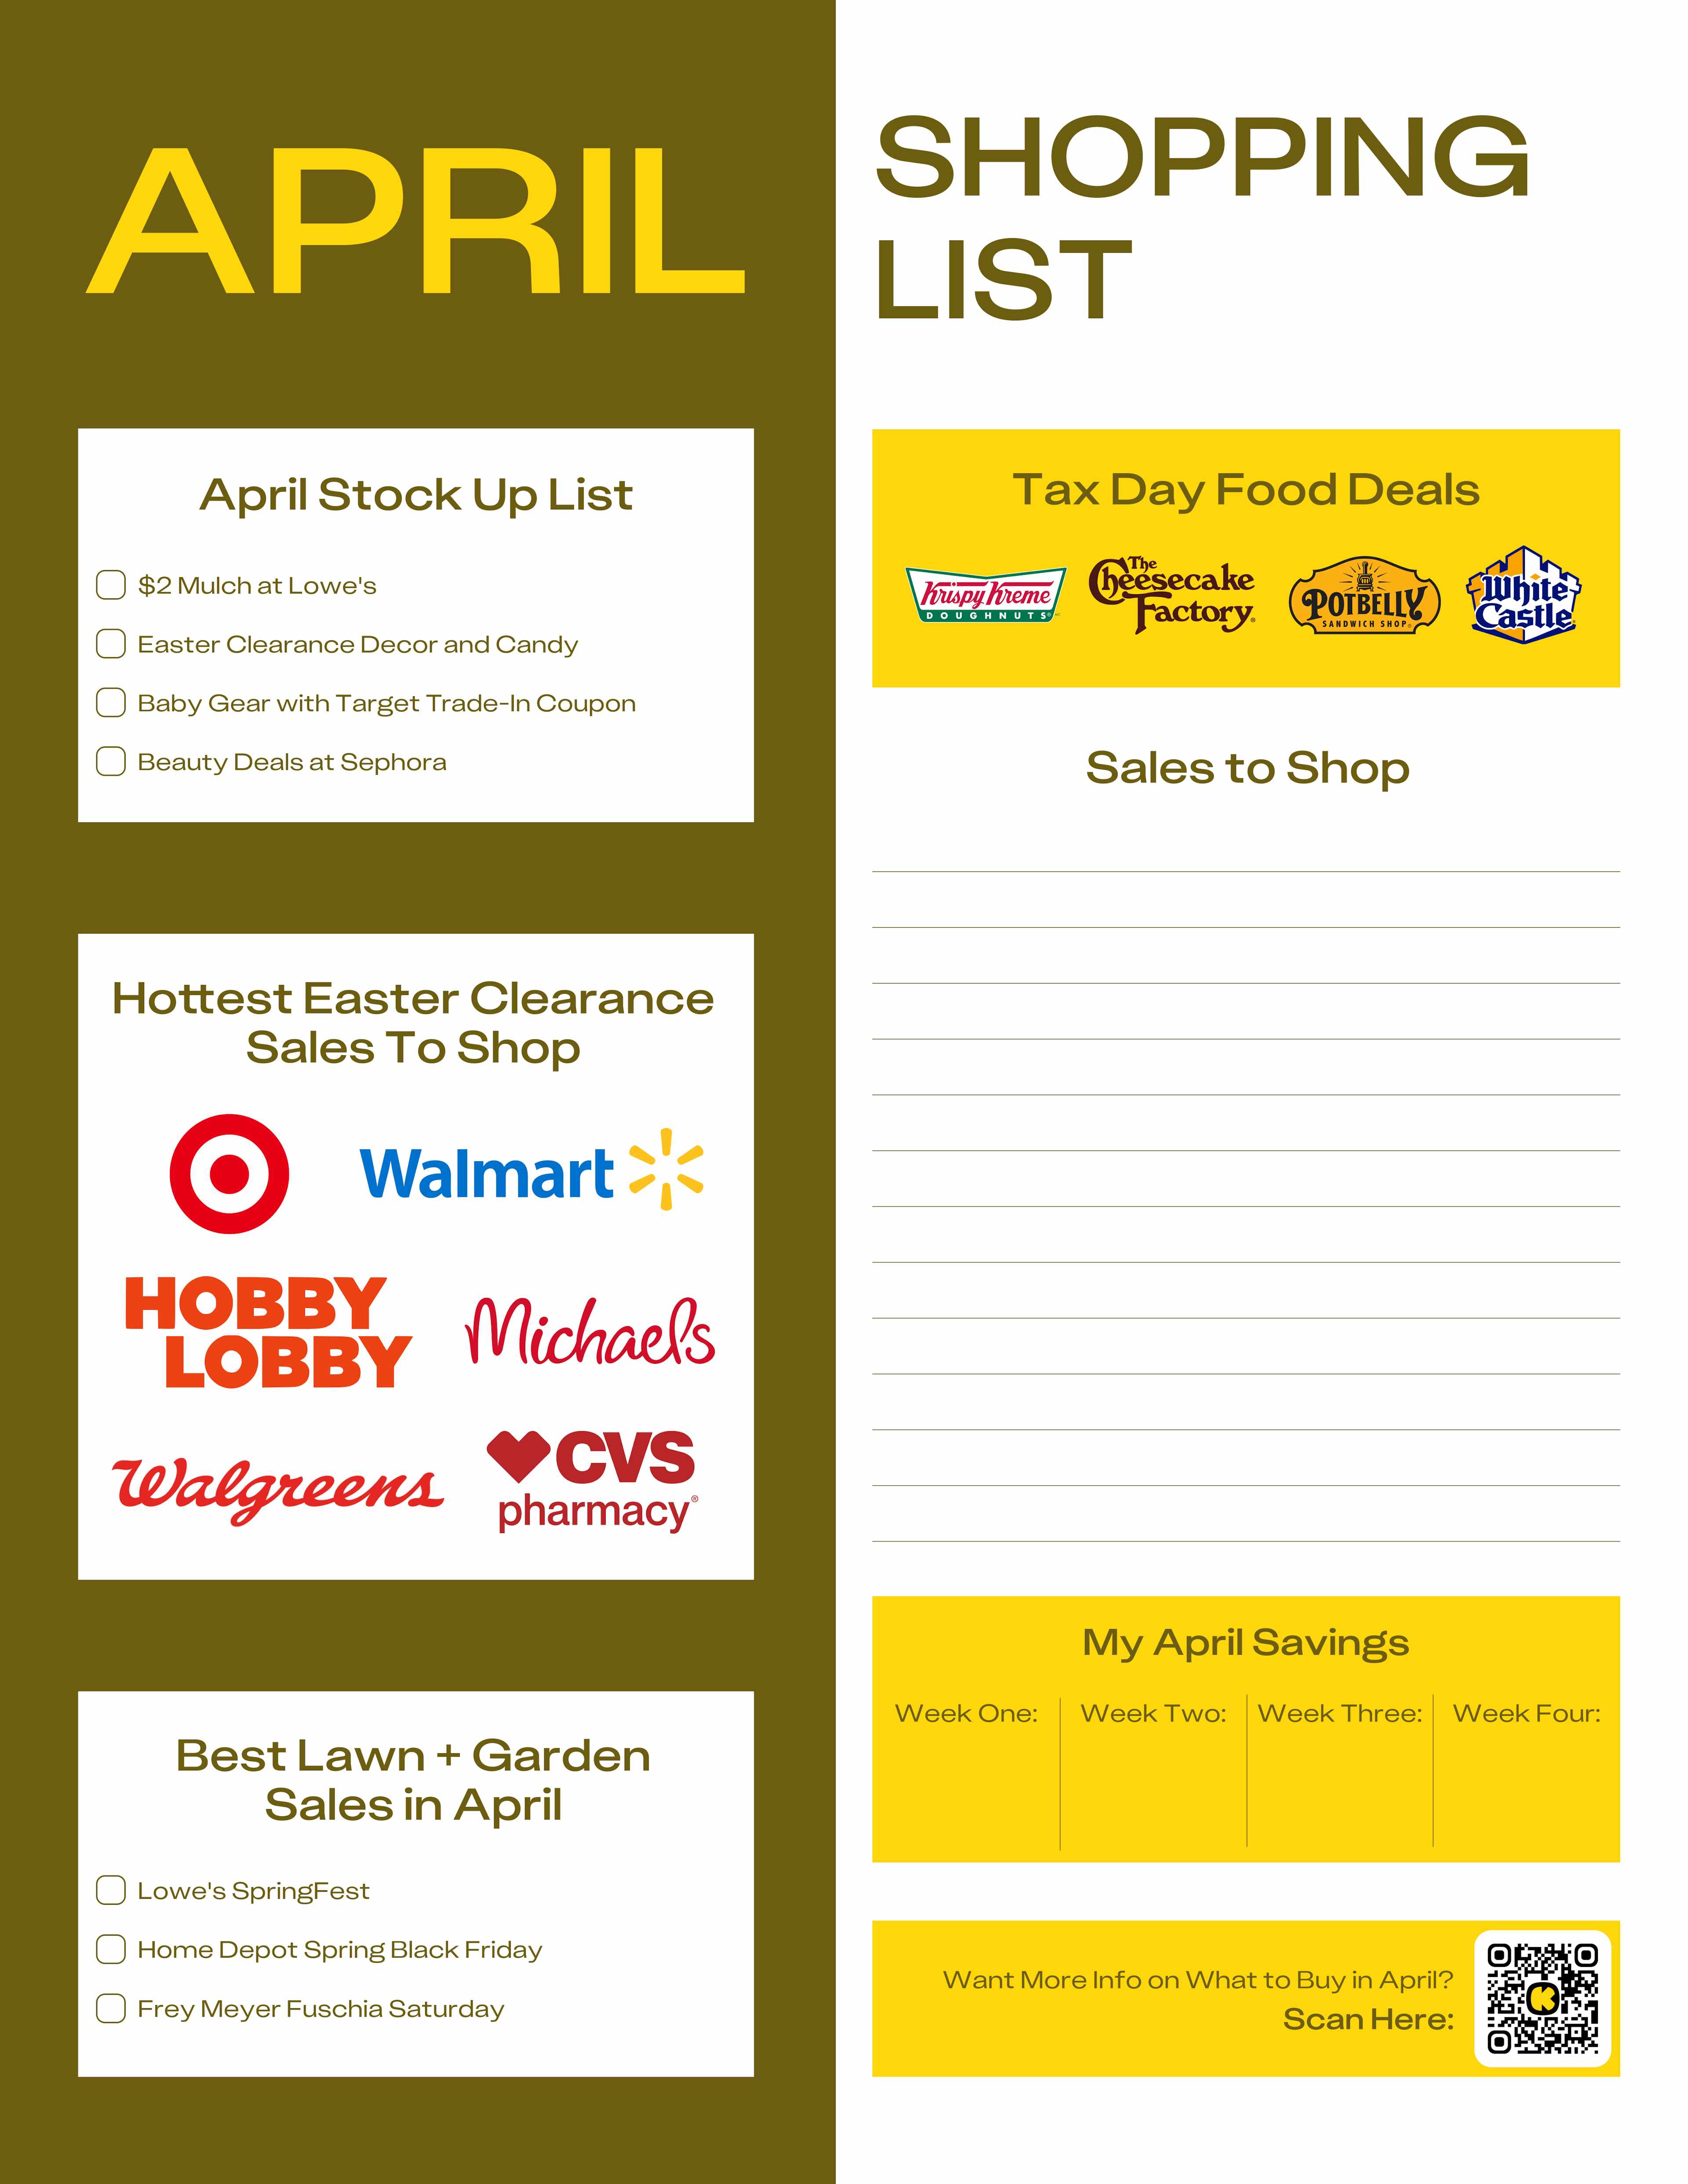 a shopping list for the month of april